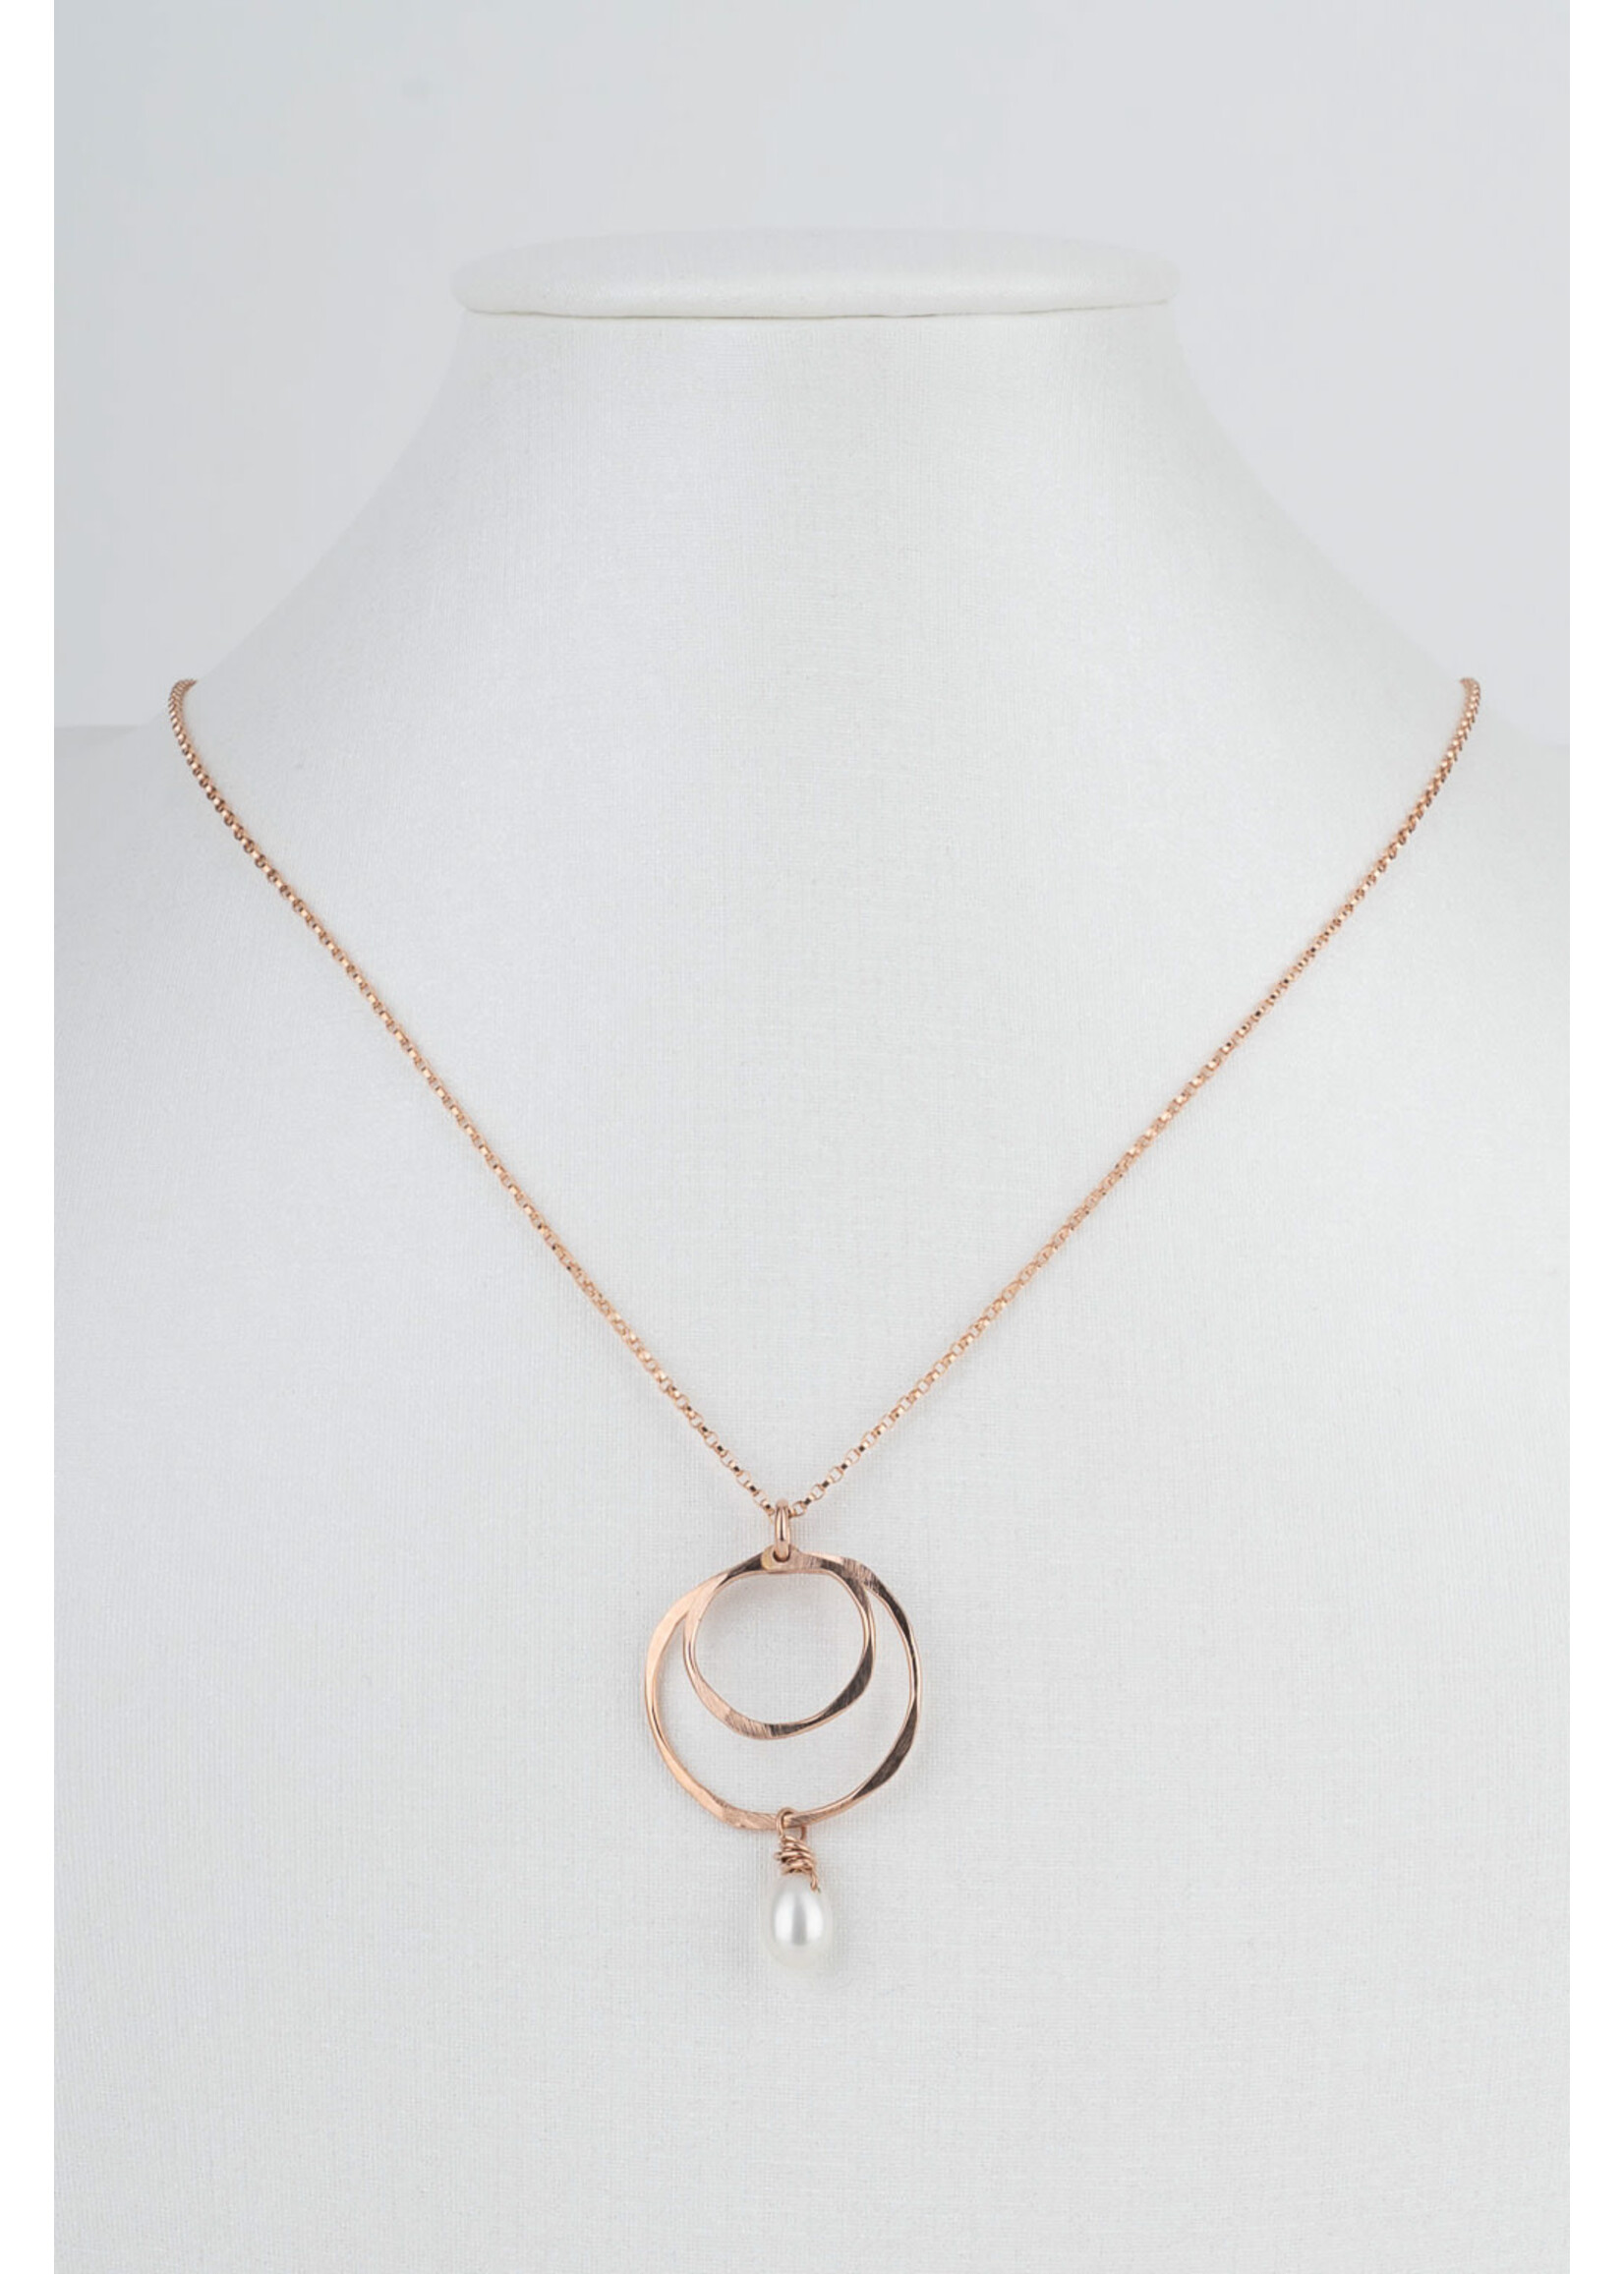 Cristy's Jewelry Designs Rose Gold Double Hoop Necklace - Pearl